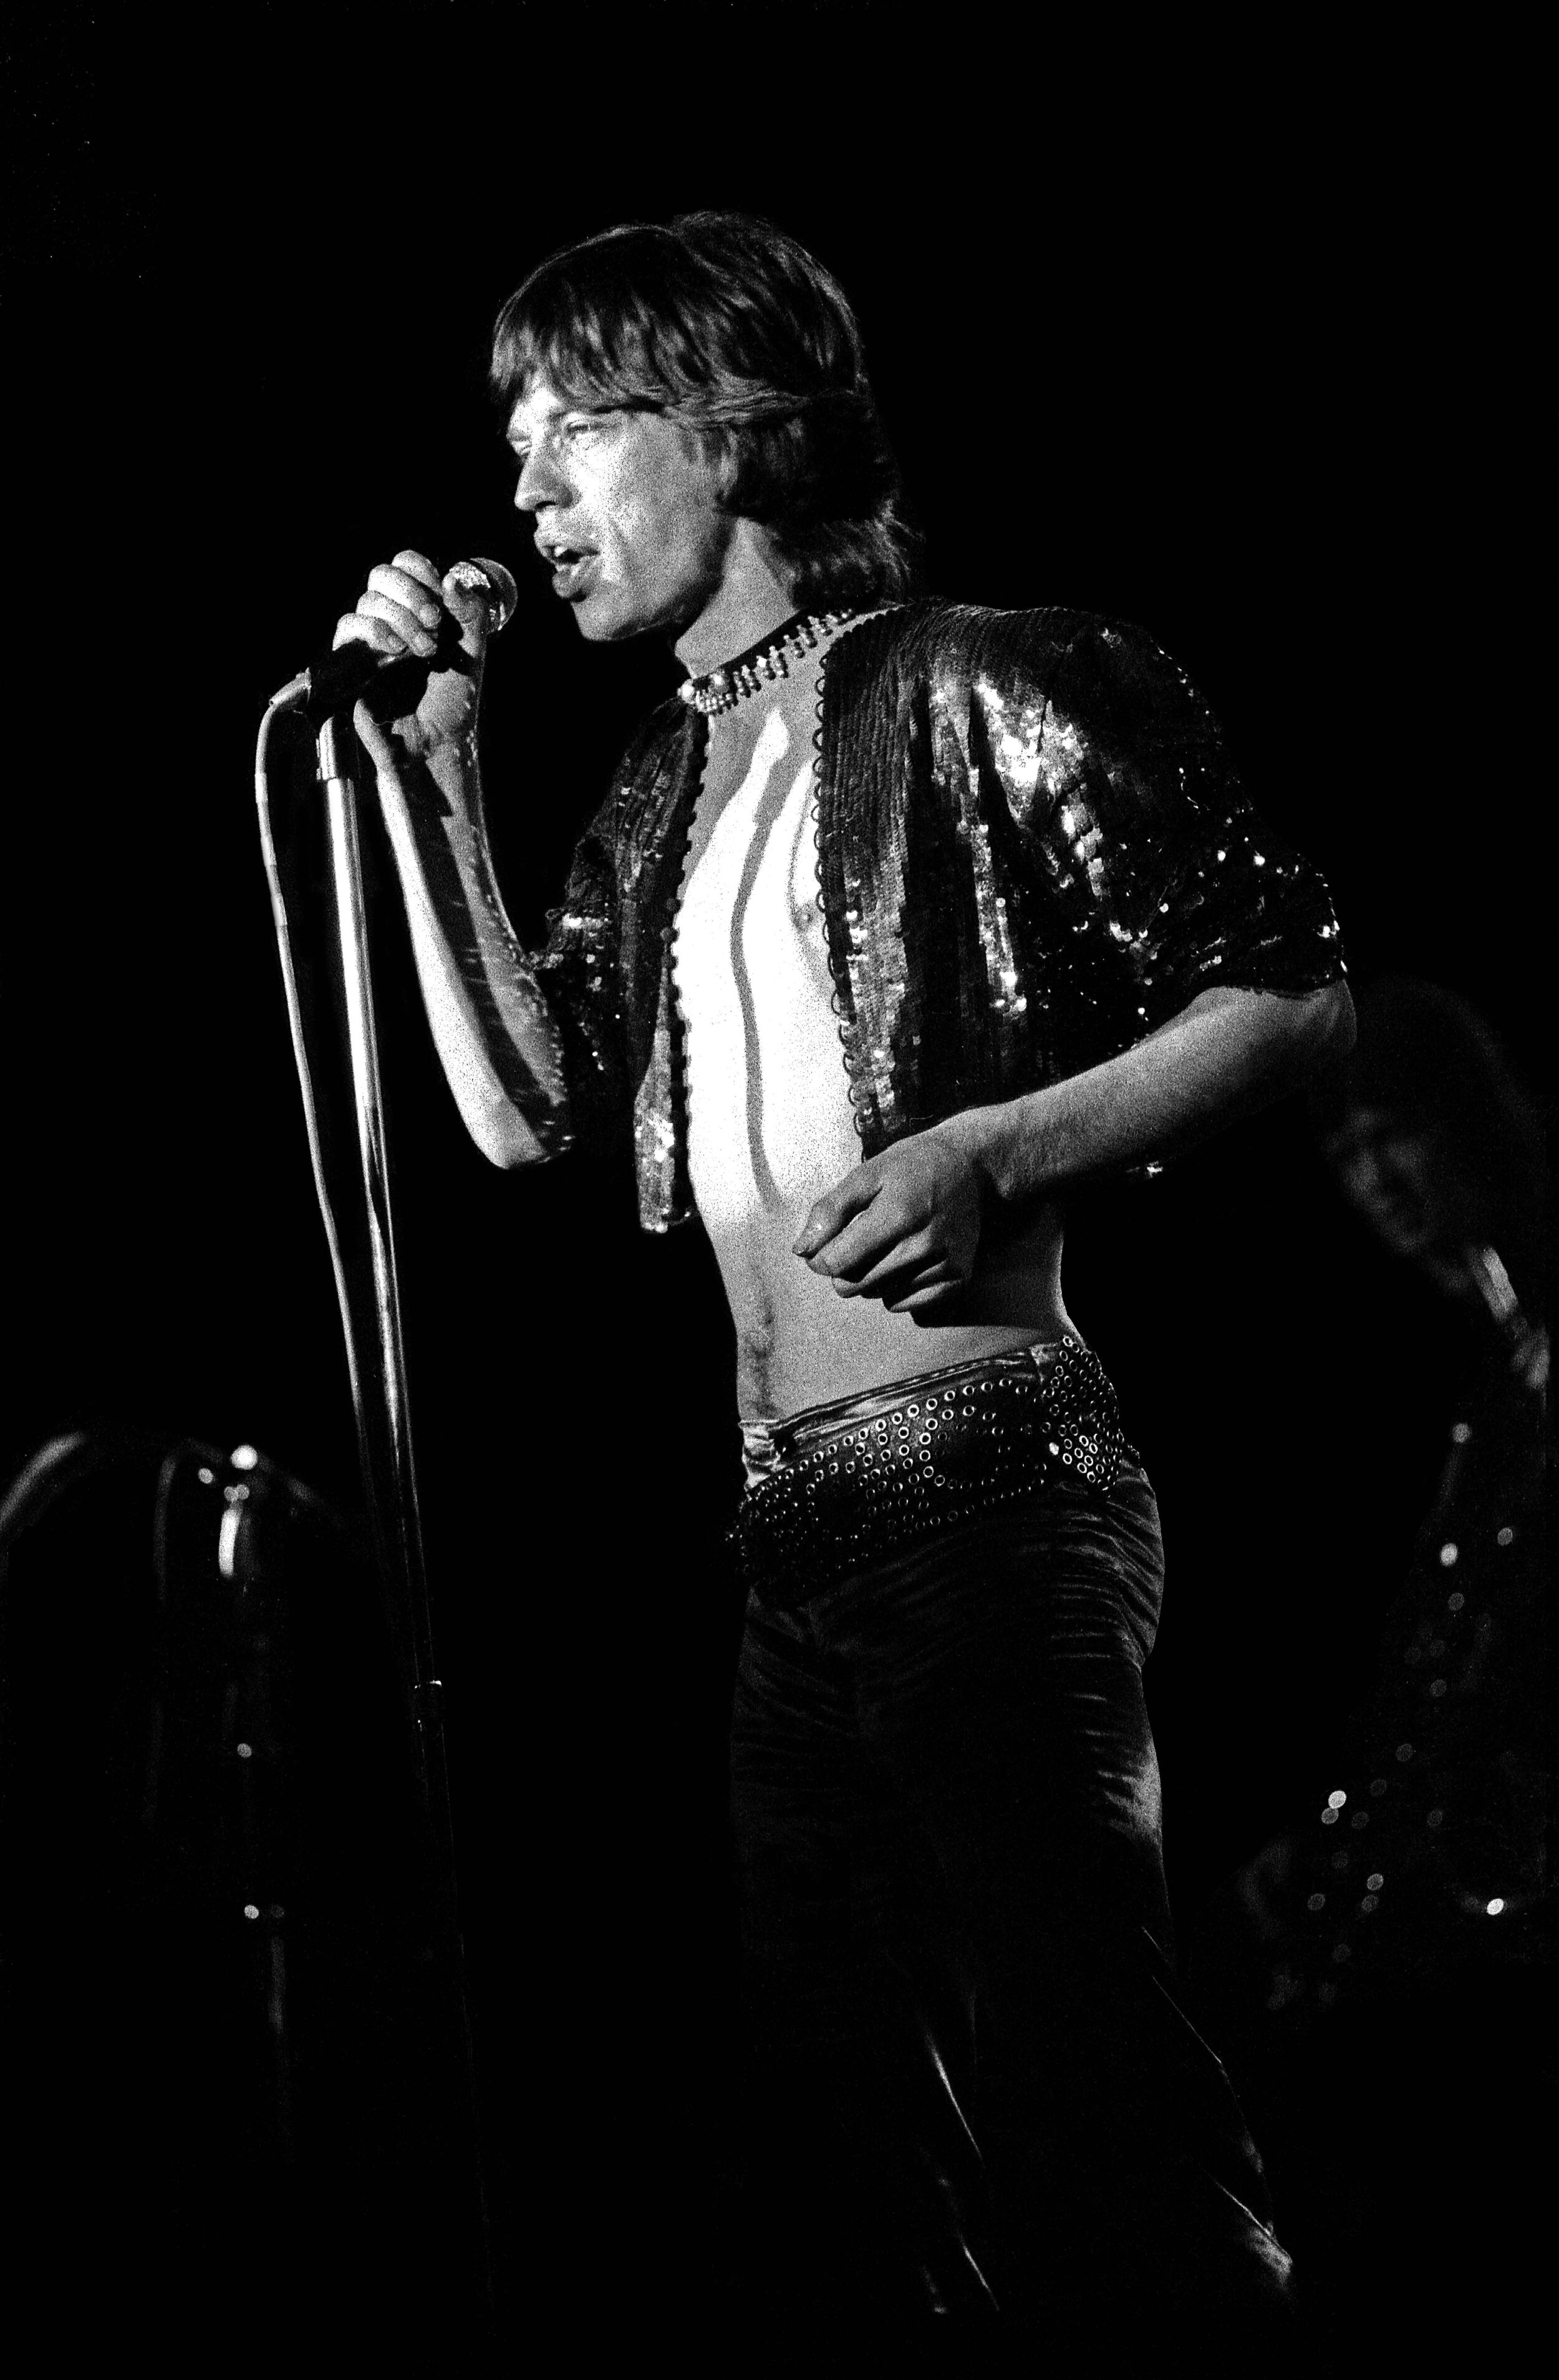 Mick Jagger of the Rolling Stones on stage.